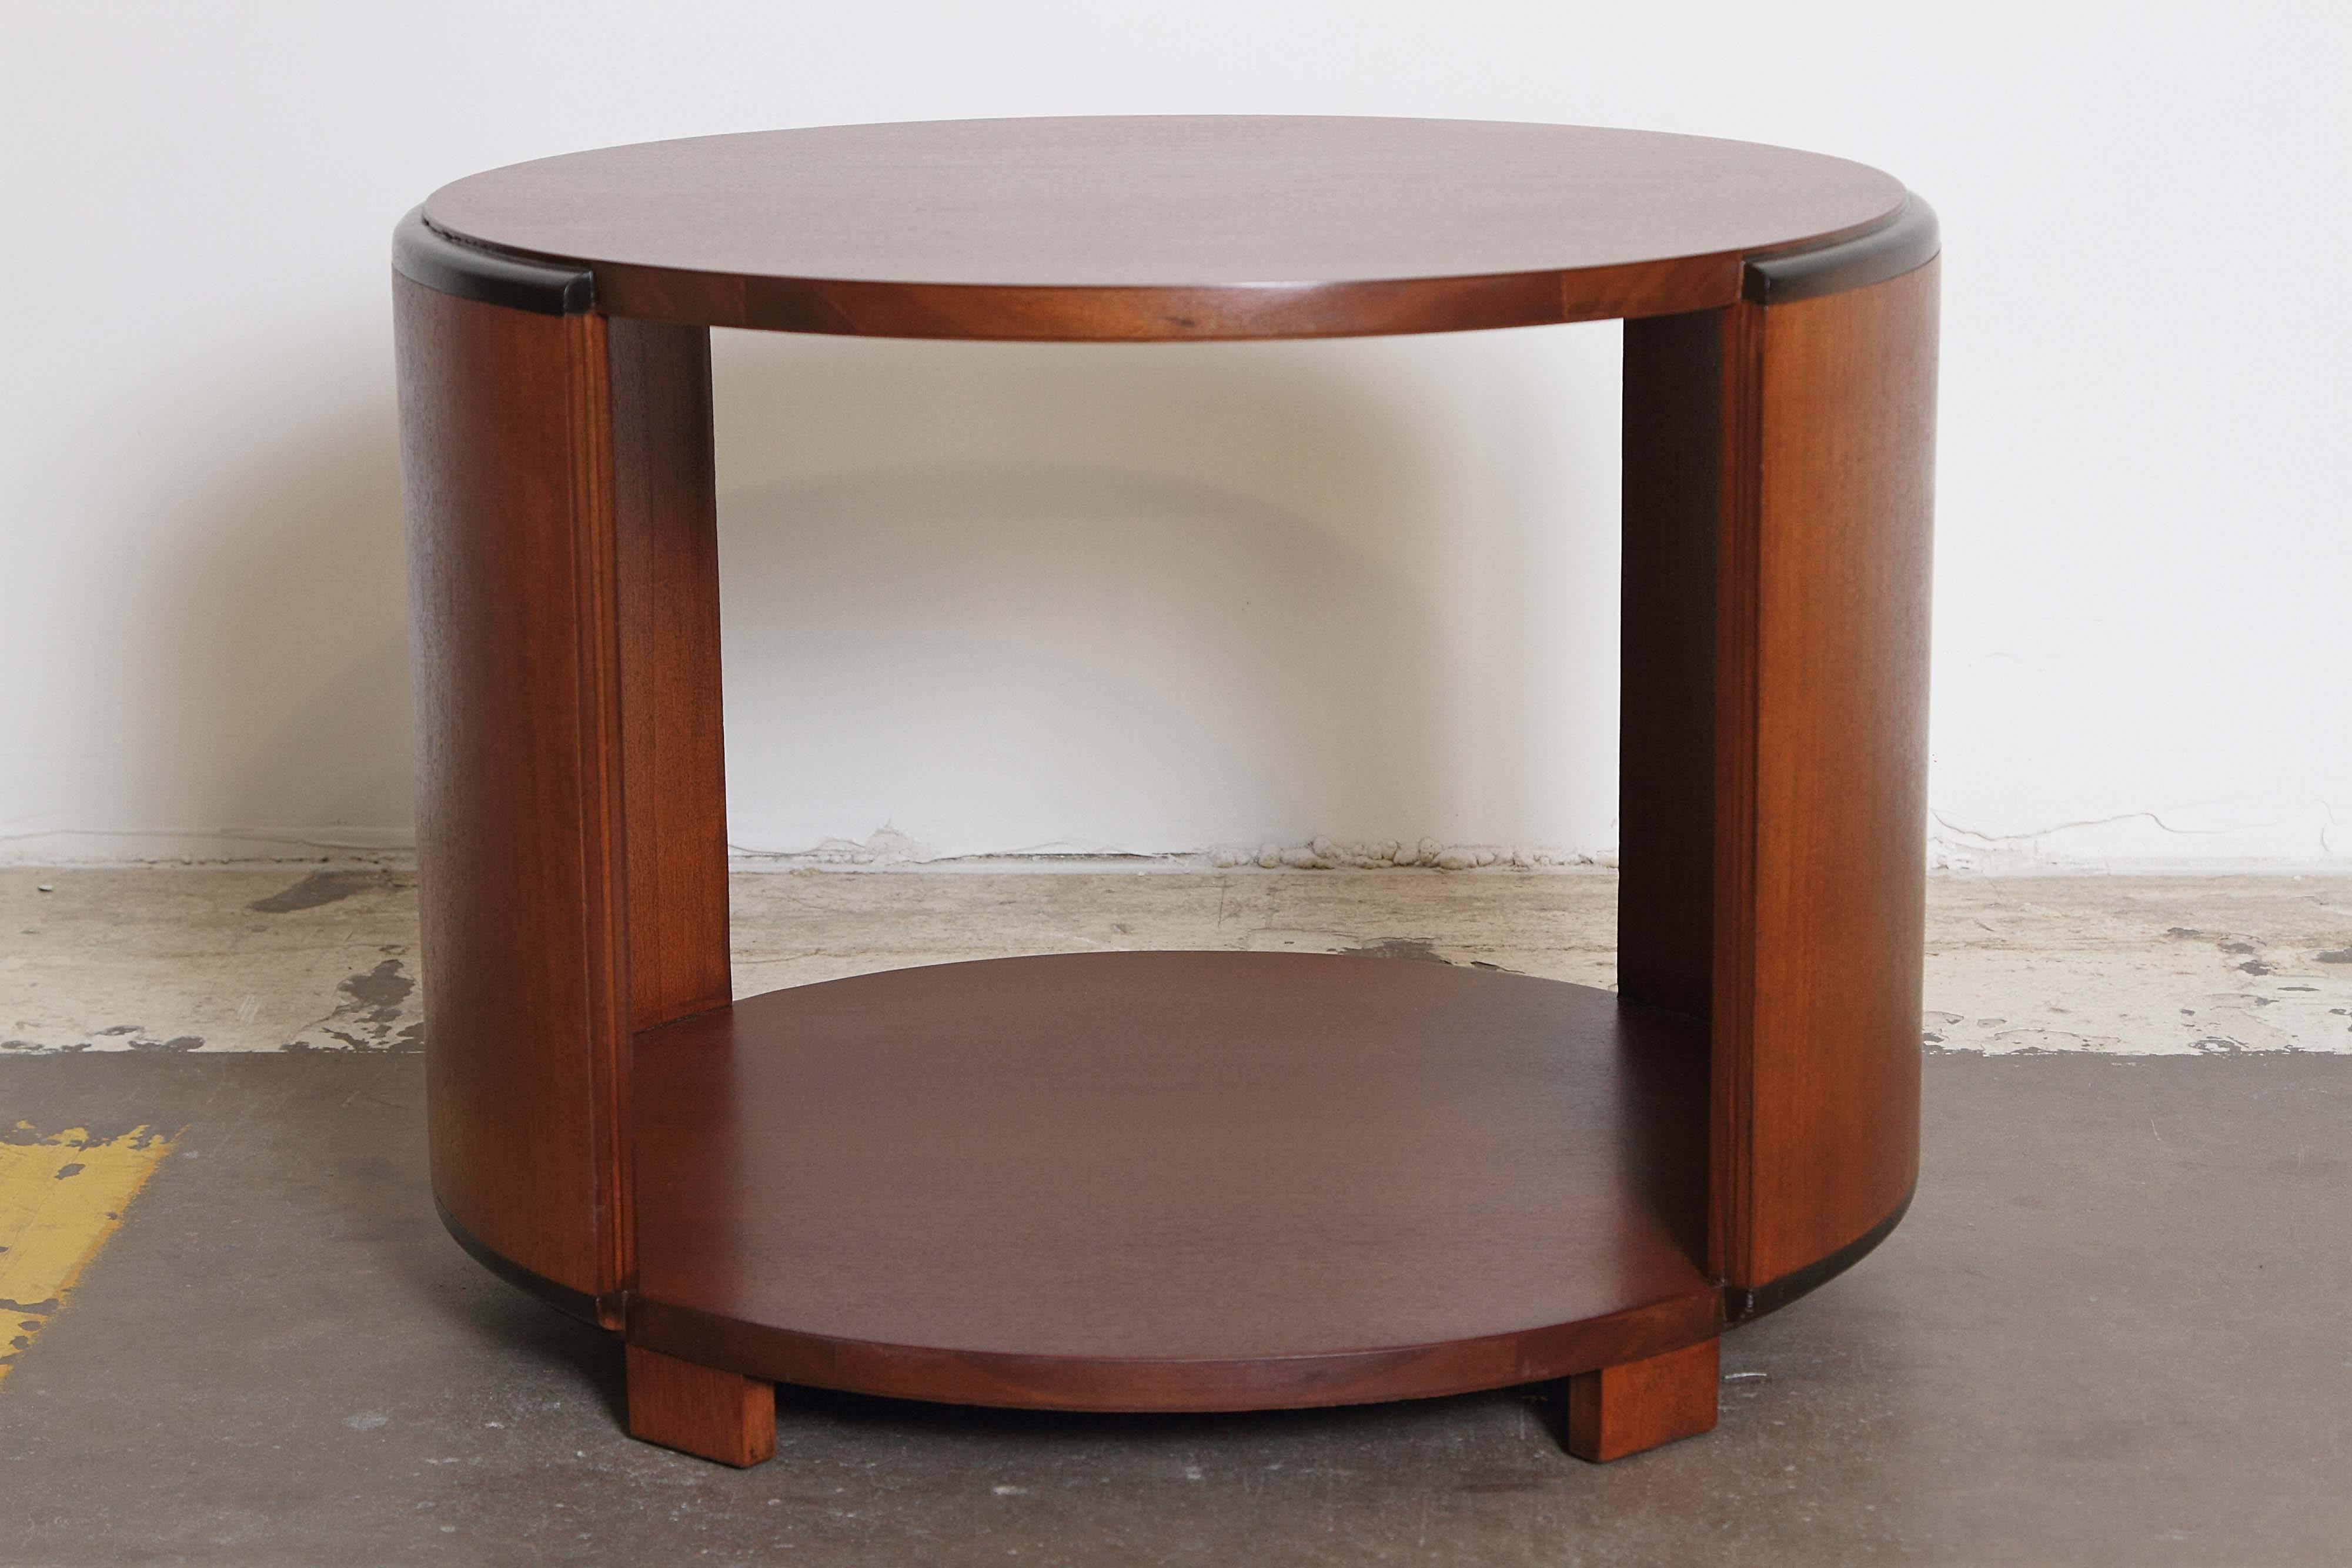 Difficult to source early Rohde line for H-M, especially this classic Rohde occasional table form.
Refinished to original specs, with partial ebonized accents.
H-M catalog #5265, circa 1935.
A tropical West African wood, one of the exotic veneers